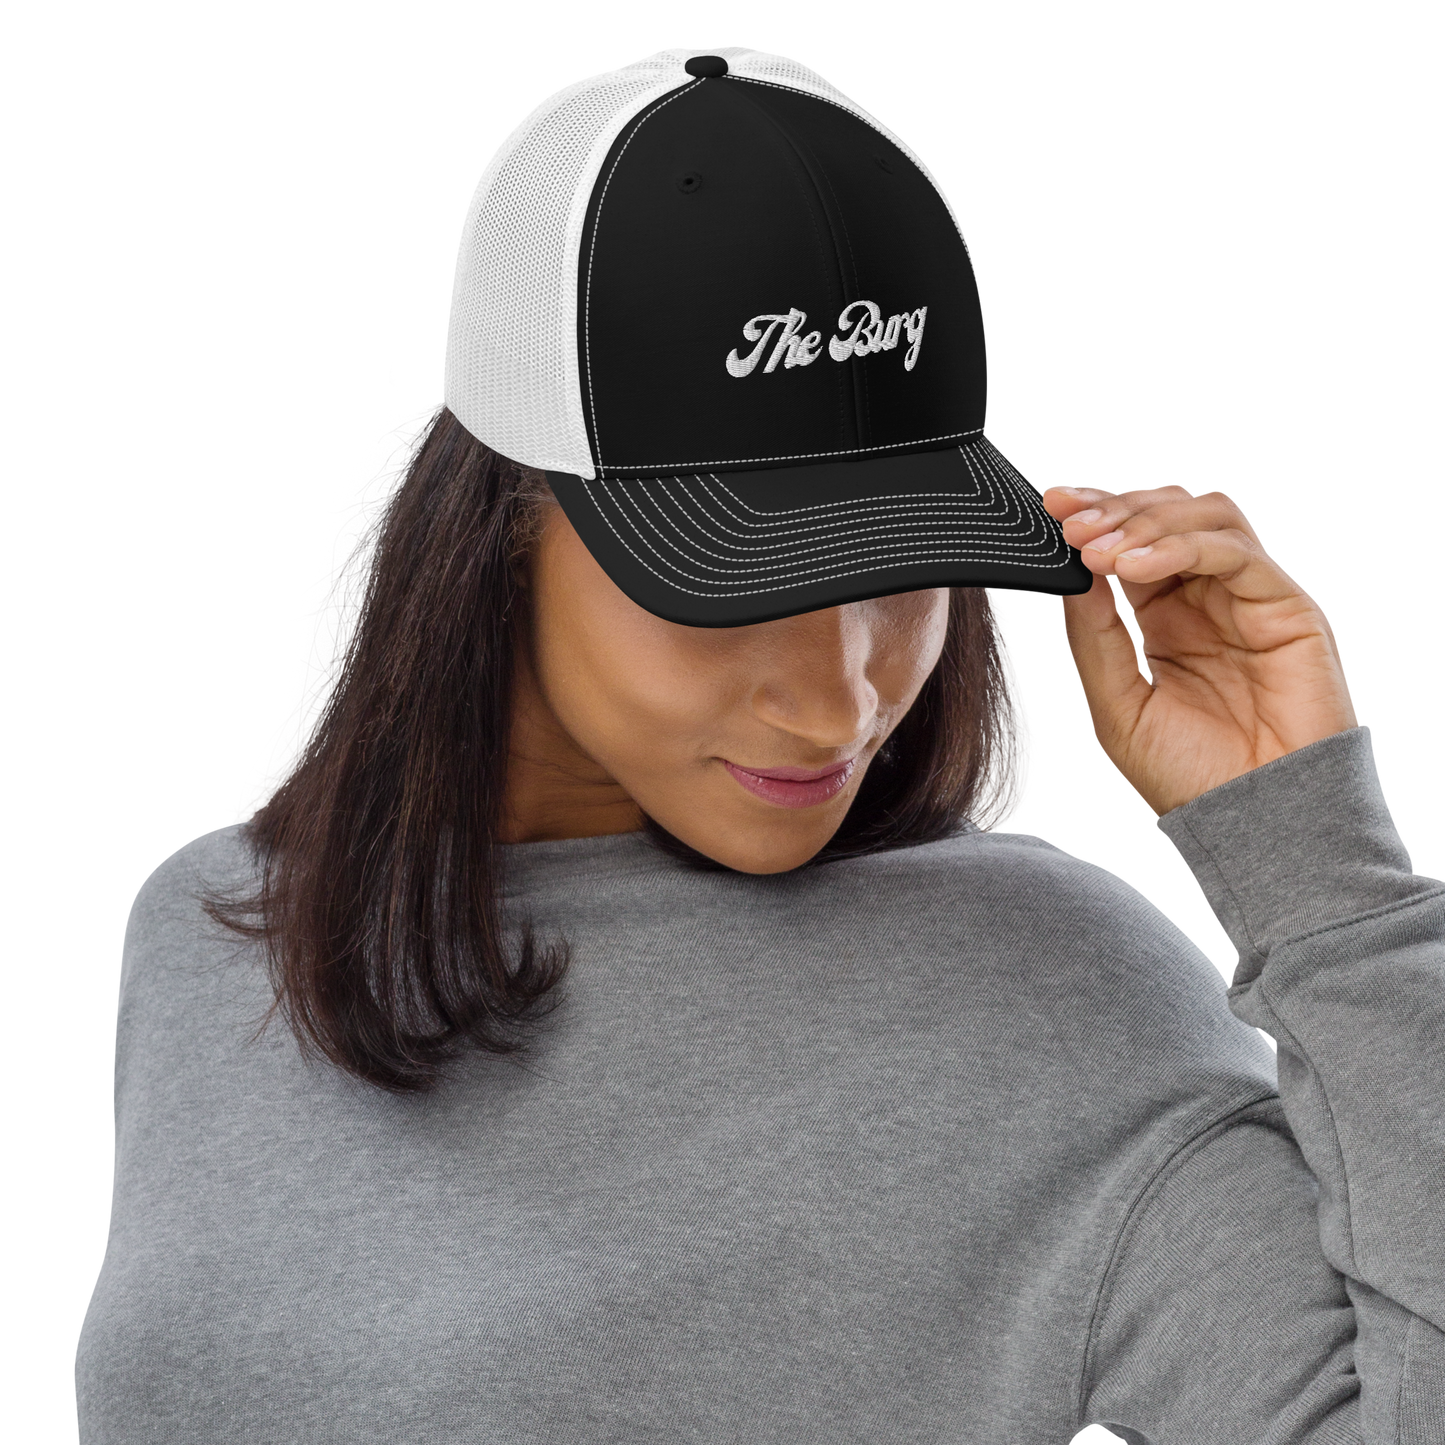 The Burg Trucker Hat - Woman Wearing The Burg Trucker Hat - Black and White Frotn